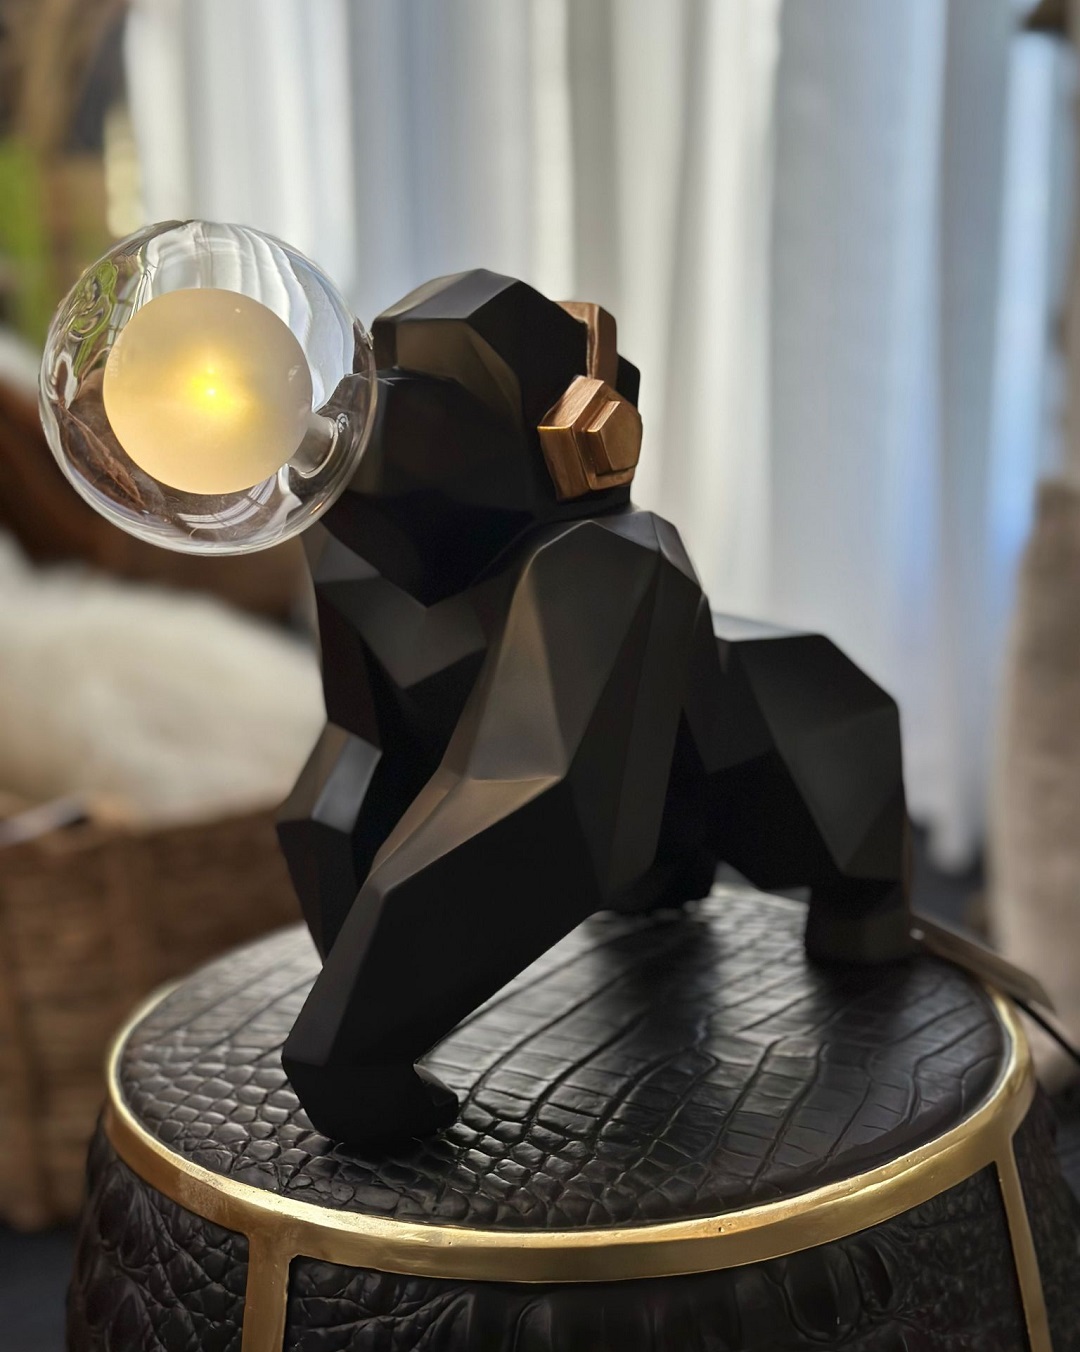 Black gorilla lamp with gold headphones holding a bulb in mouth sitting on black stool